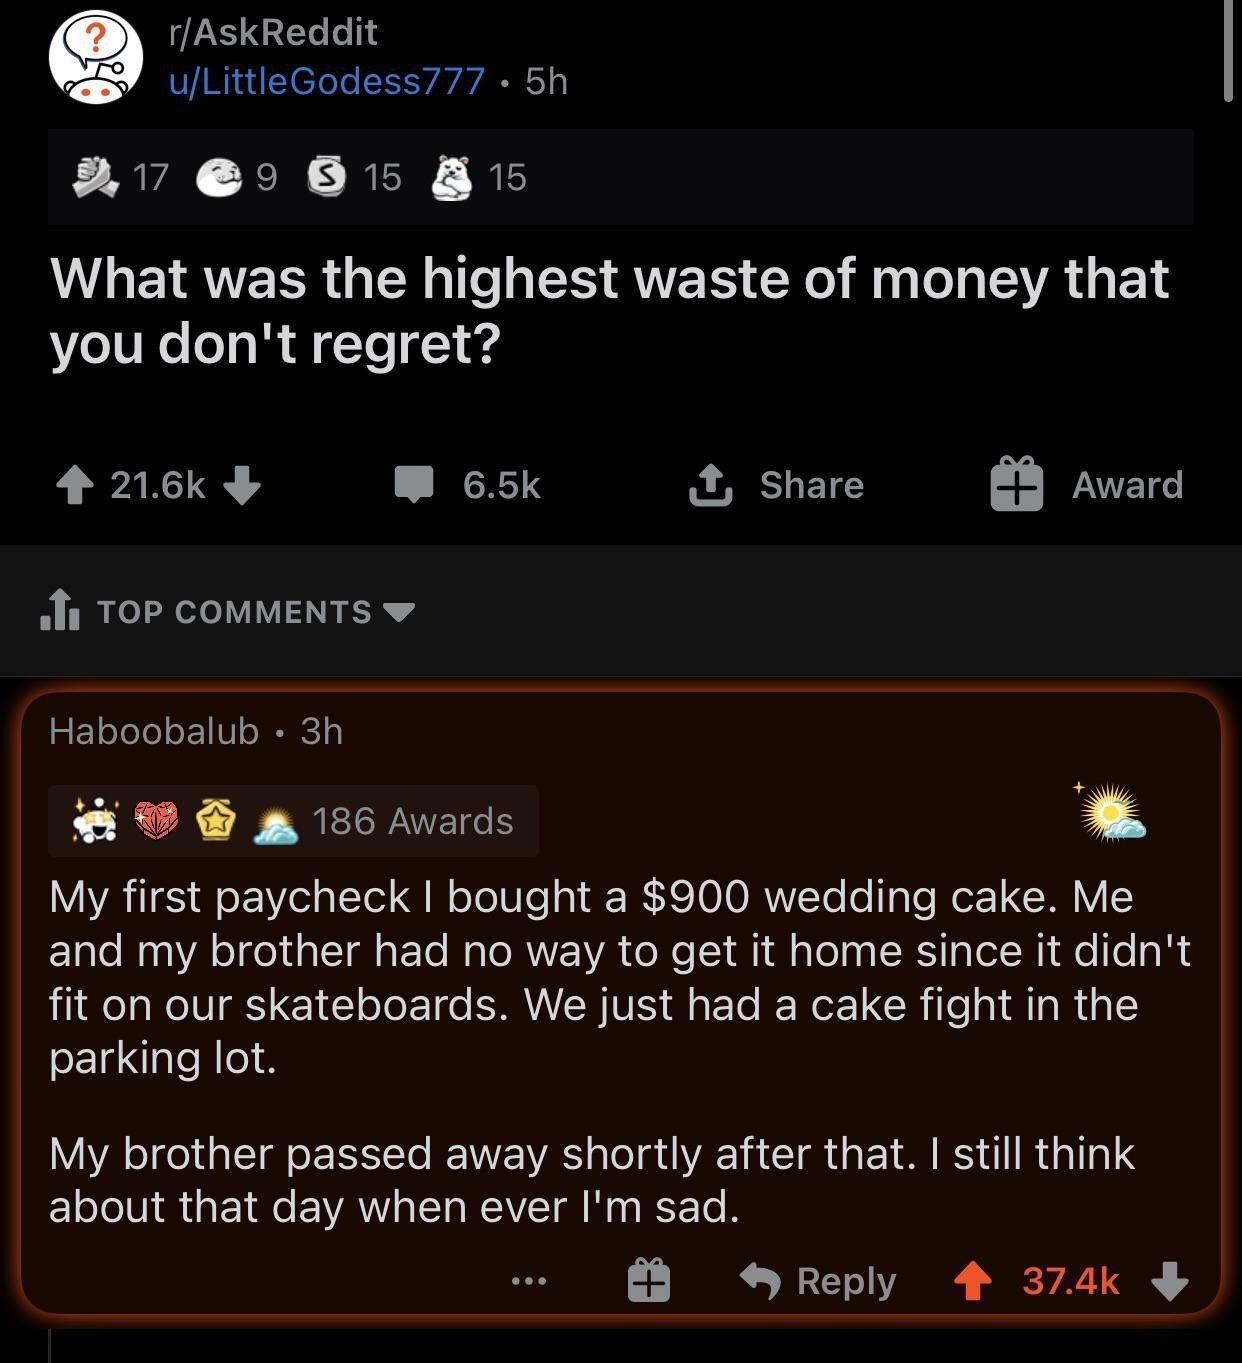 a person bought a $900 wedding cake and had a cake fight with his brother but he doesn&#x27;t regret it because his brother died shortly after